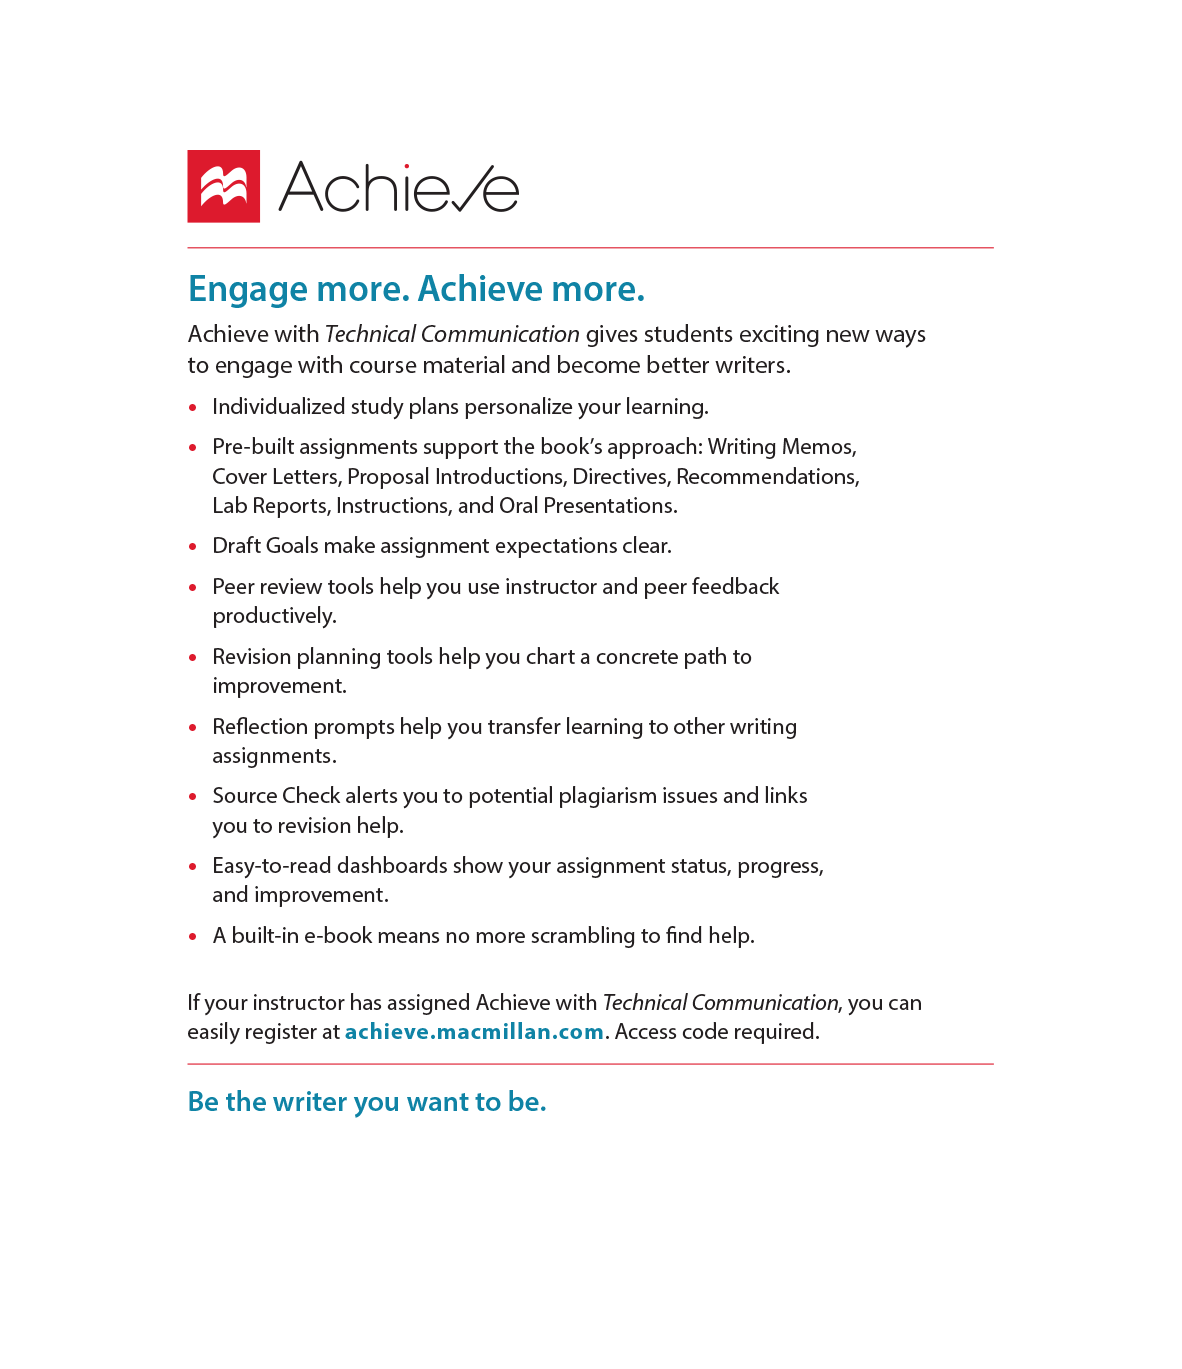 A logo of Achieve is at the top of the inside front cover Text on the inside - photo 2